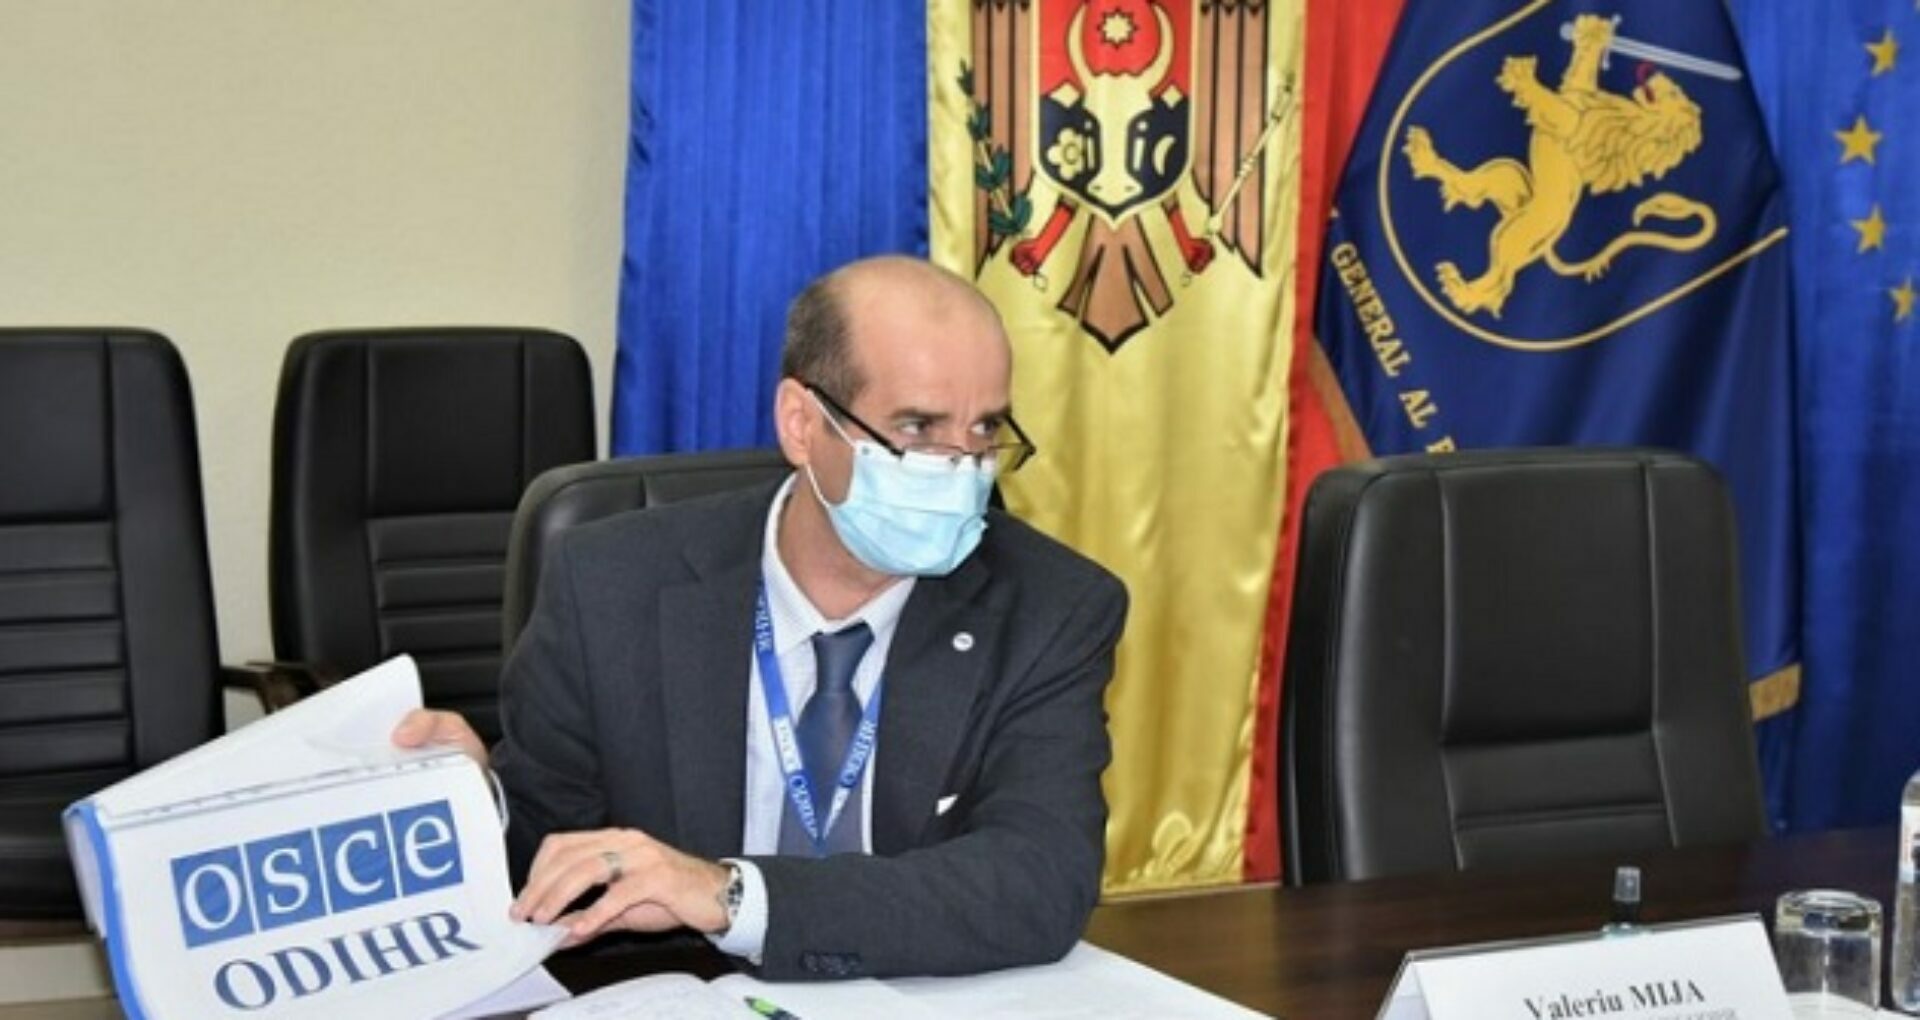 Moldovan Police Department Supports the ODIHR Mission for the Upcoming Presidential Elections